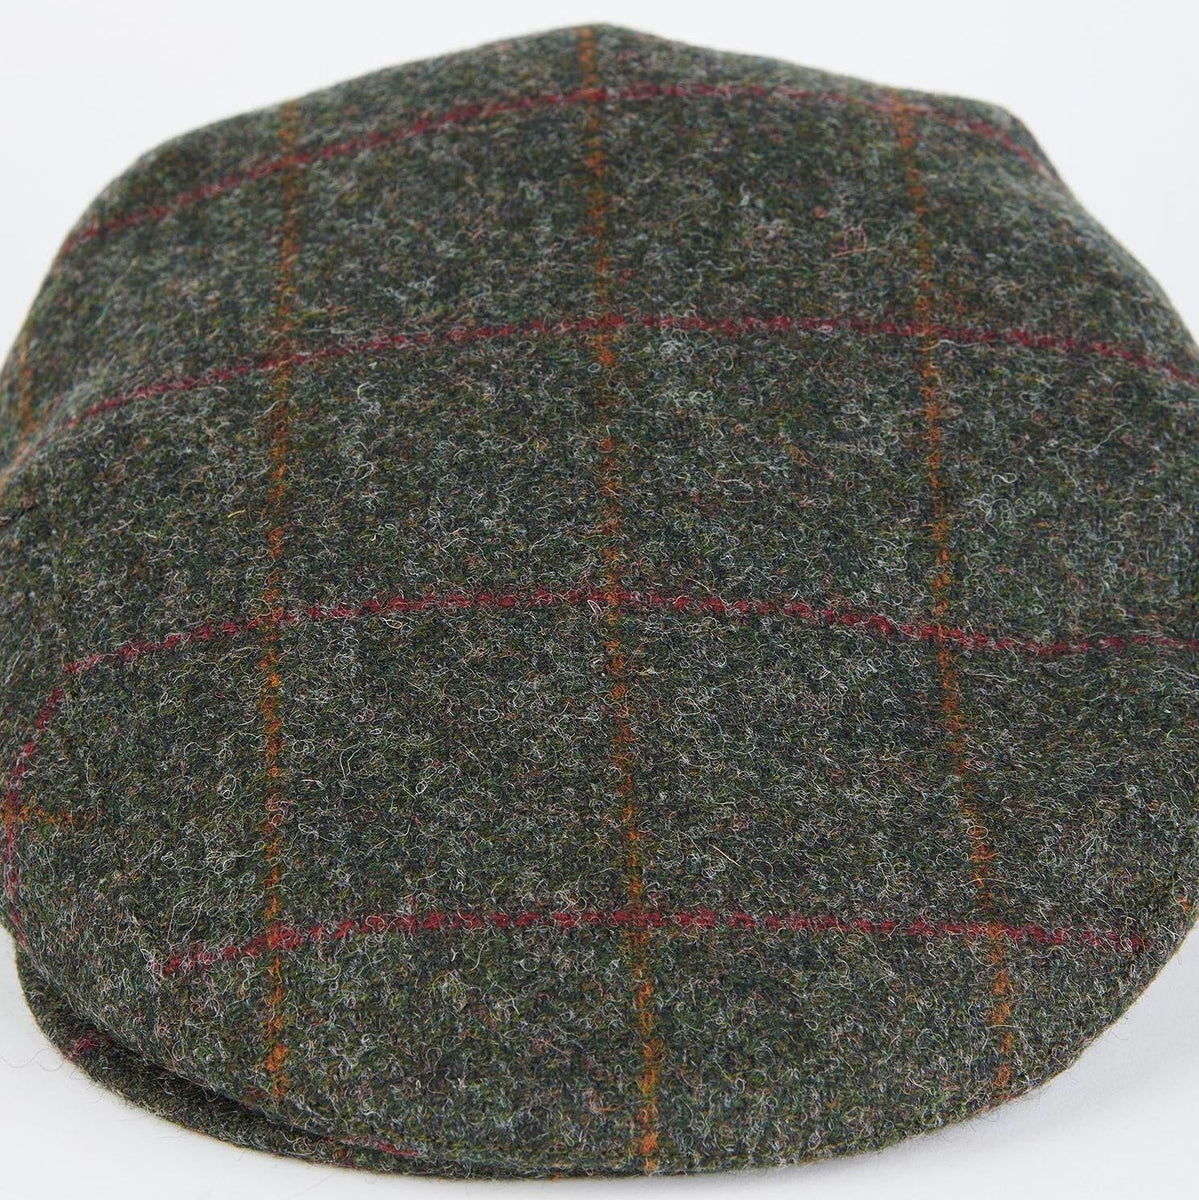 Barbour Cap Crieff Flat cap in Olive/Red wool overcheck MHA0009OL52 ...